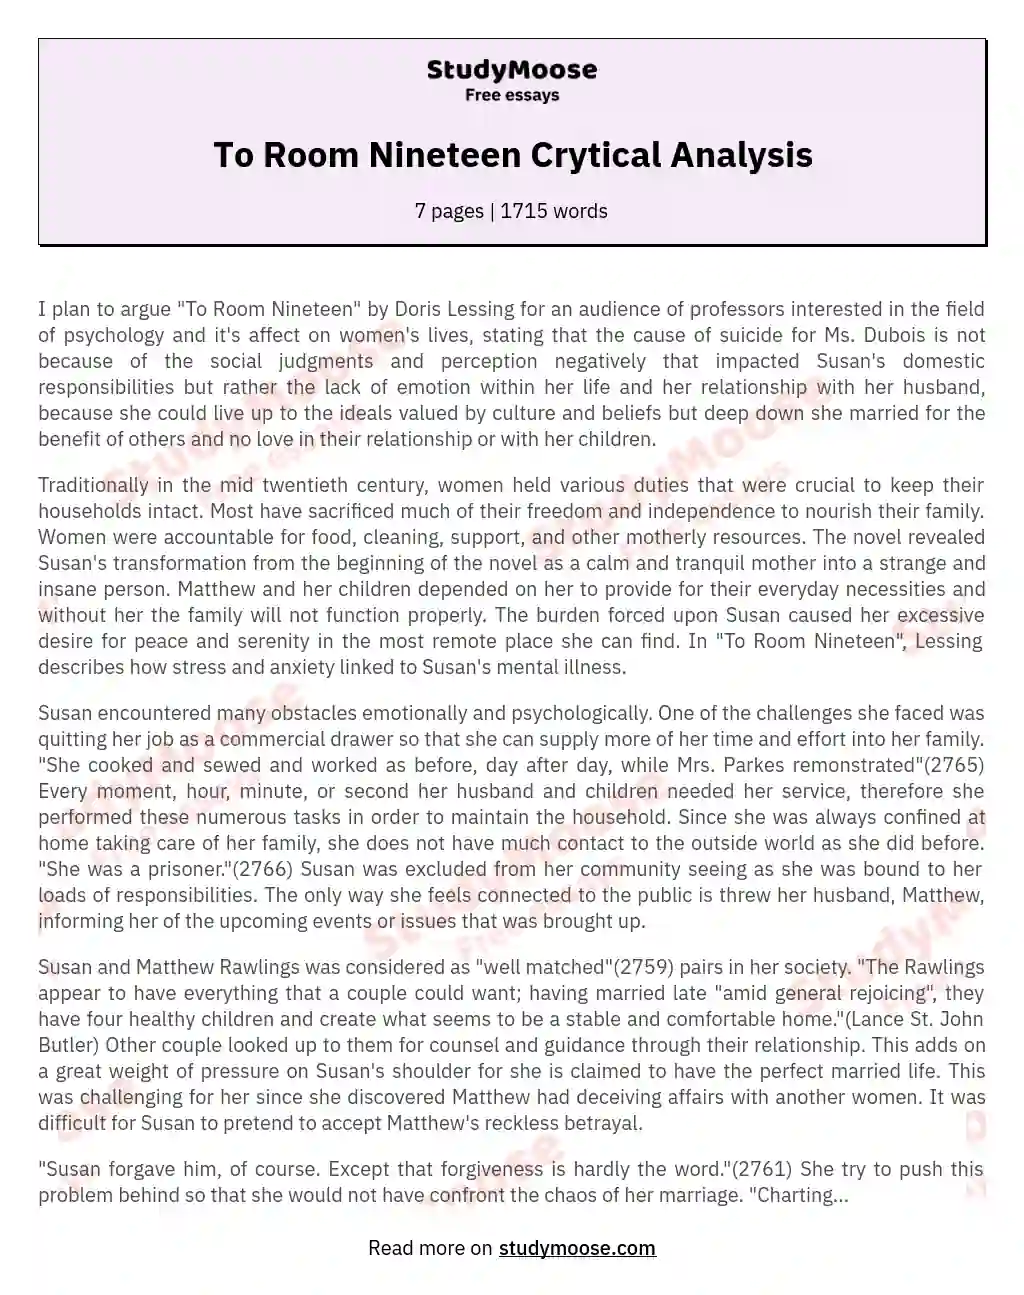 To Room Nineteen Crytical Analysis essay